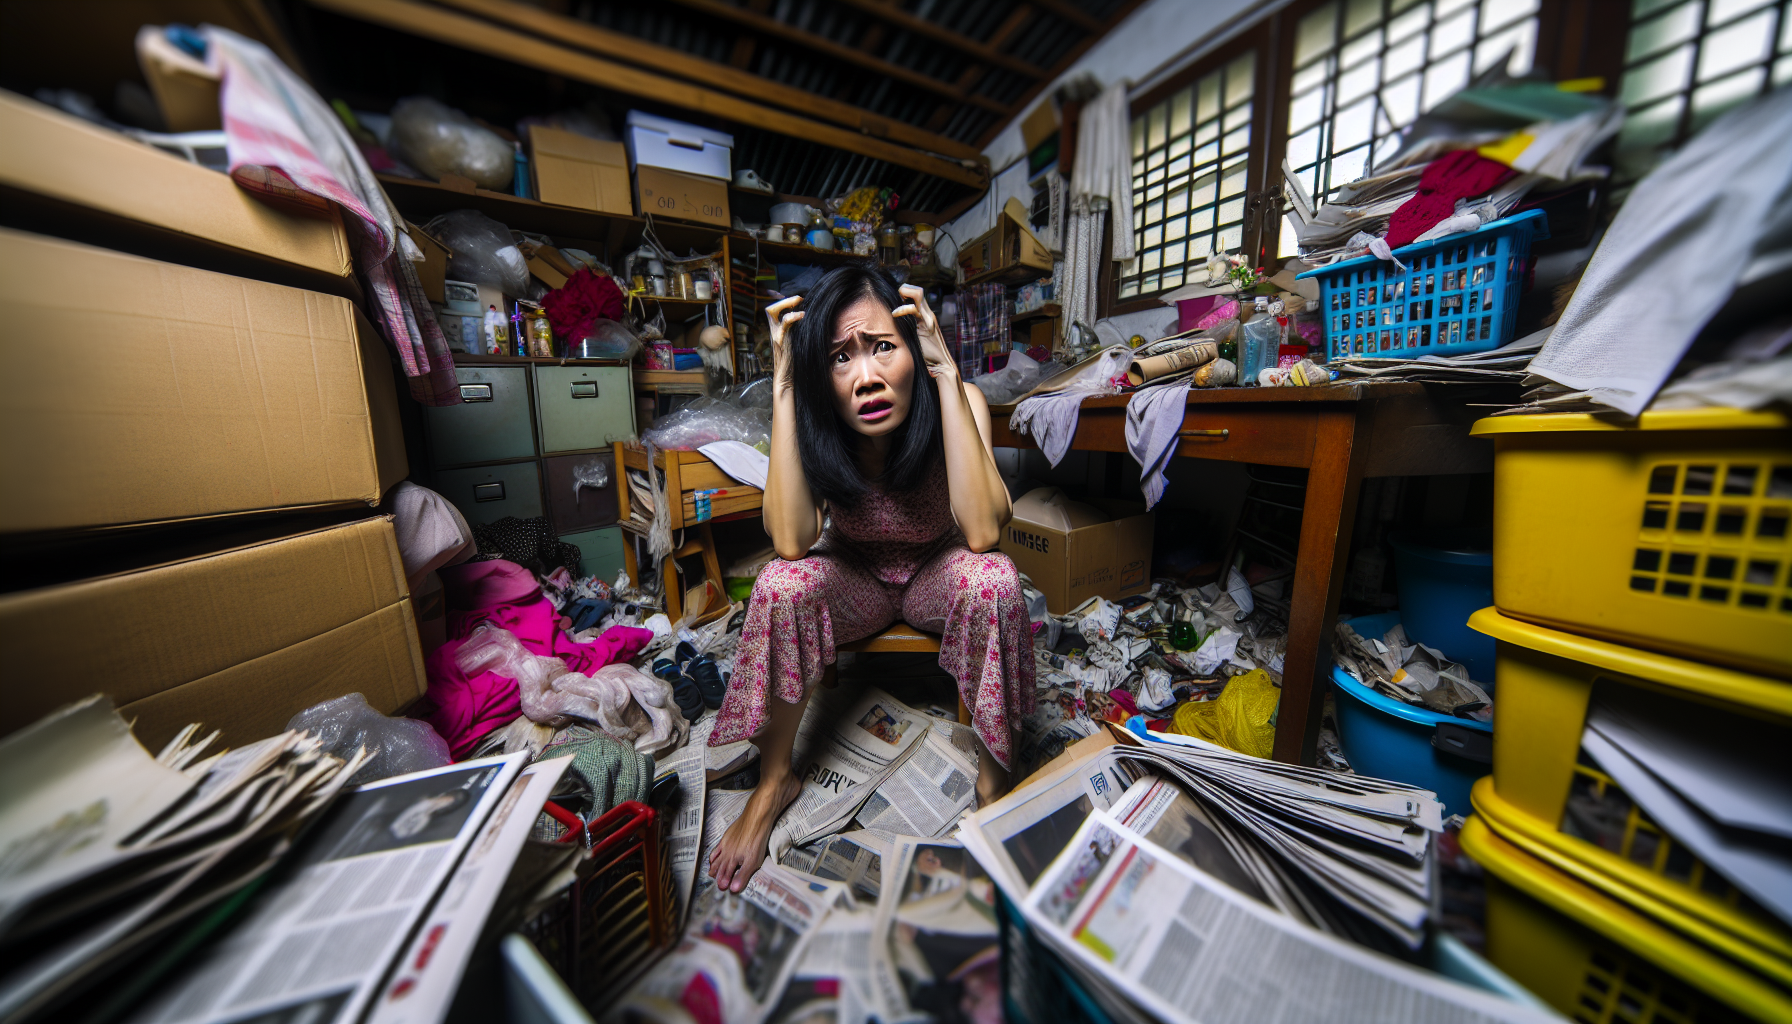 A person feeling stressed and overwhelmed while surrounded by clutter